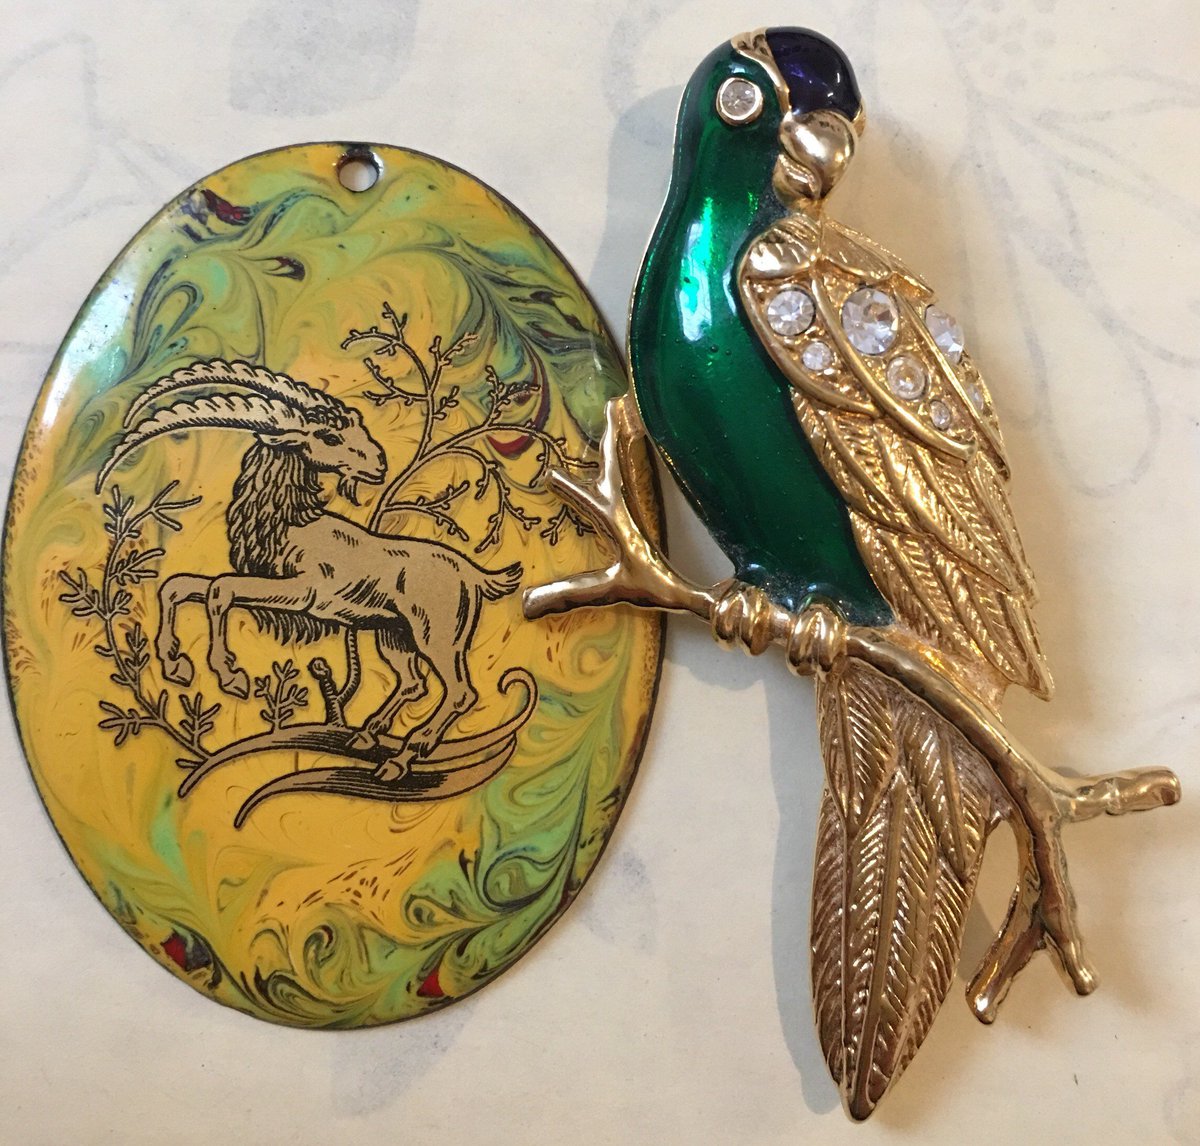 Excited to share the latest addition to my #etsy shop: Vintage enamelled gold plated Parrot brooch & enamelled pendant etsy.me/2BcNKYW #jewellery #brooch #vintagejewellery #antiquejewellery #retrojewellery #handpainted #pendant #retrobrooch #vintagependant